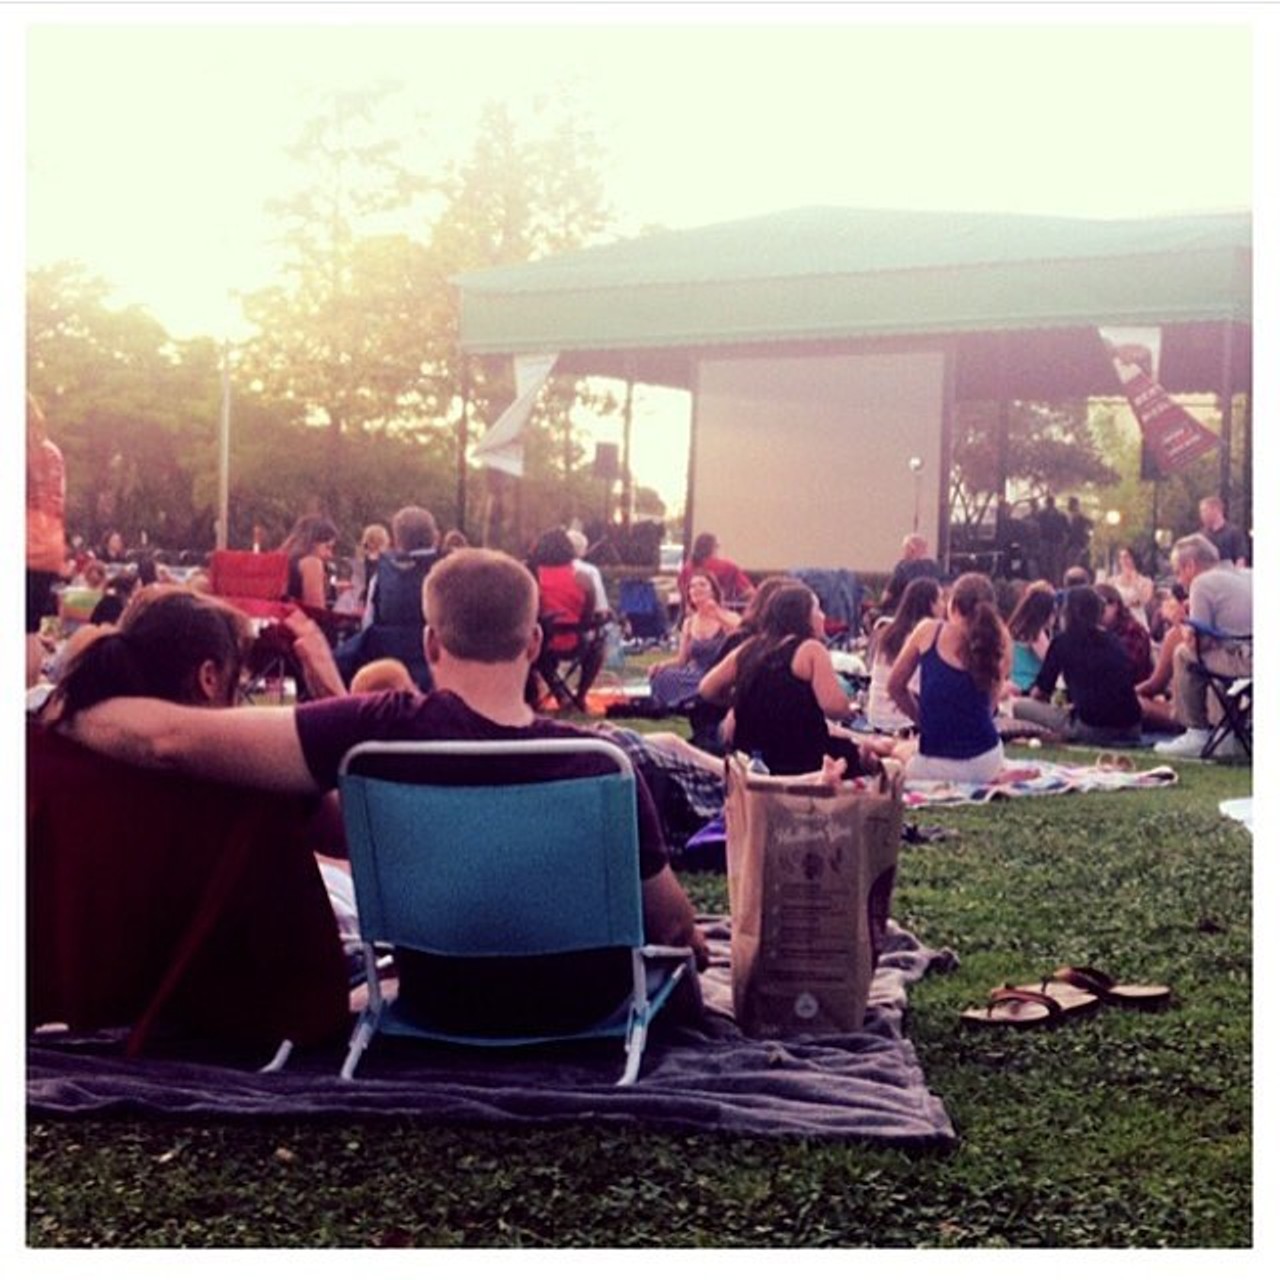 Getting to an outdoor movie at Enzian less than an hour before it starts
Good luck finding a single square inch of grass for your blanket. Looks like you'll have to dust off that Beetlejuice VHS after all.
Photo via aroundwinterpark on Instagram